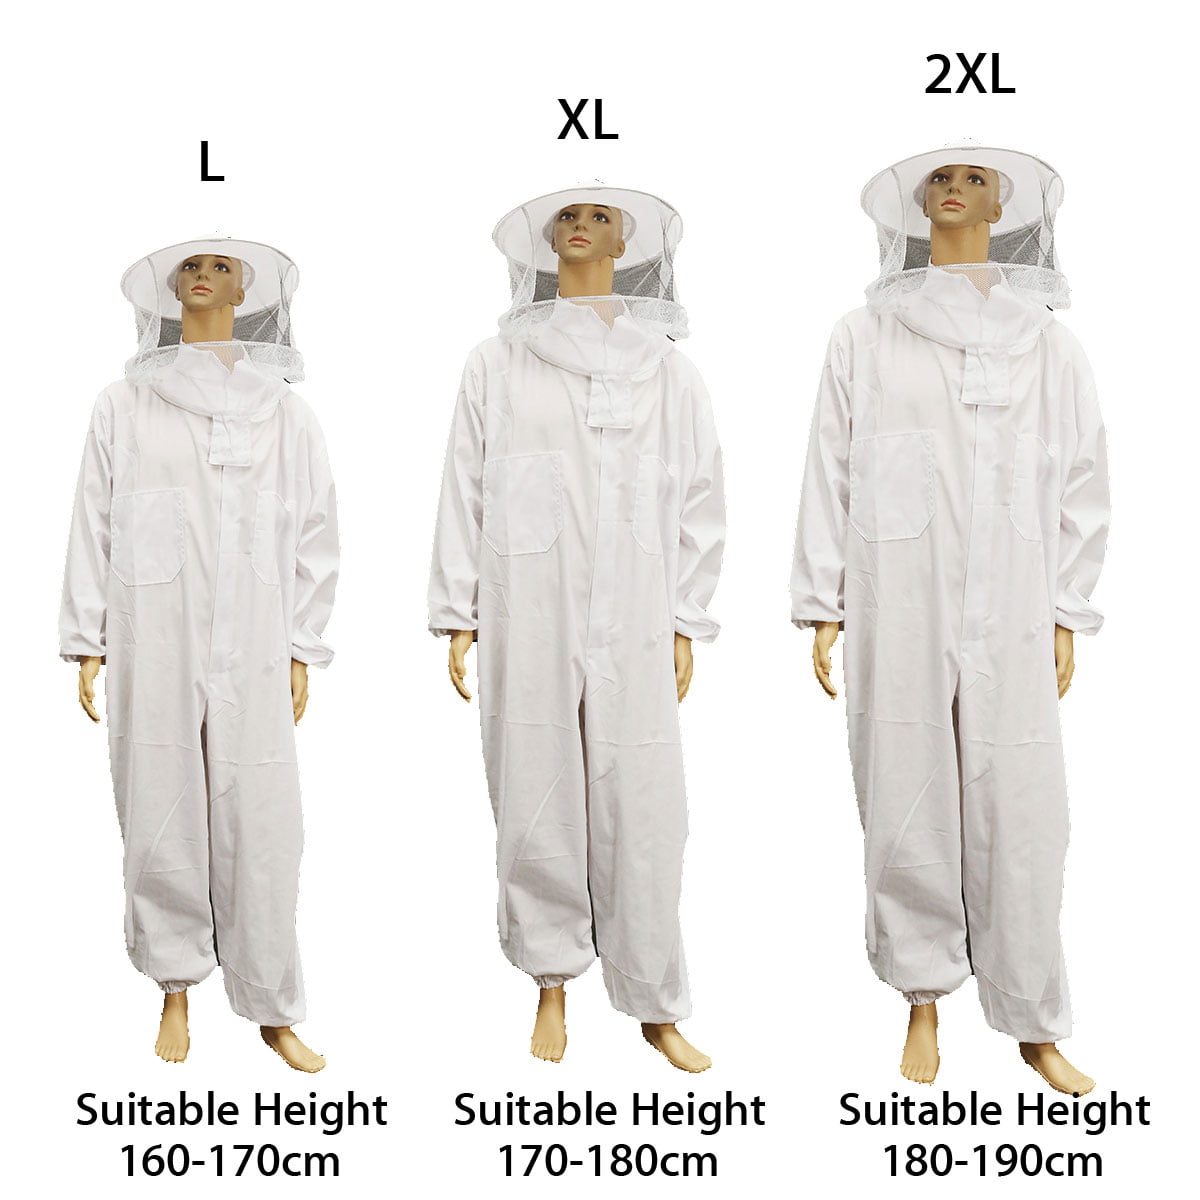 Beekeeping Protection Equipment Veil Bee Keeping Full Body Hat White Suit XL 